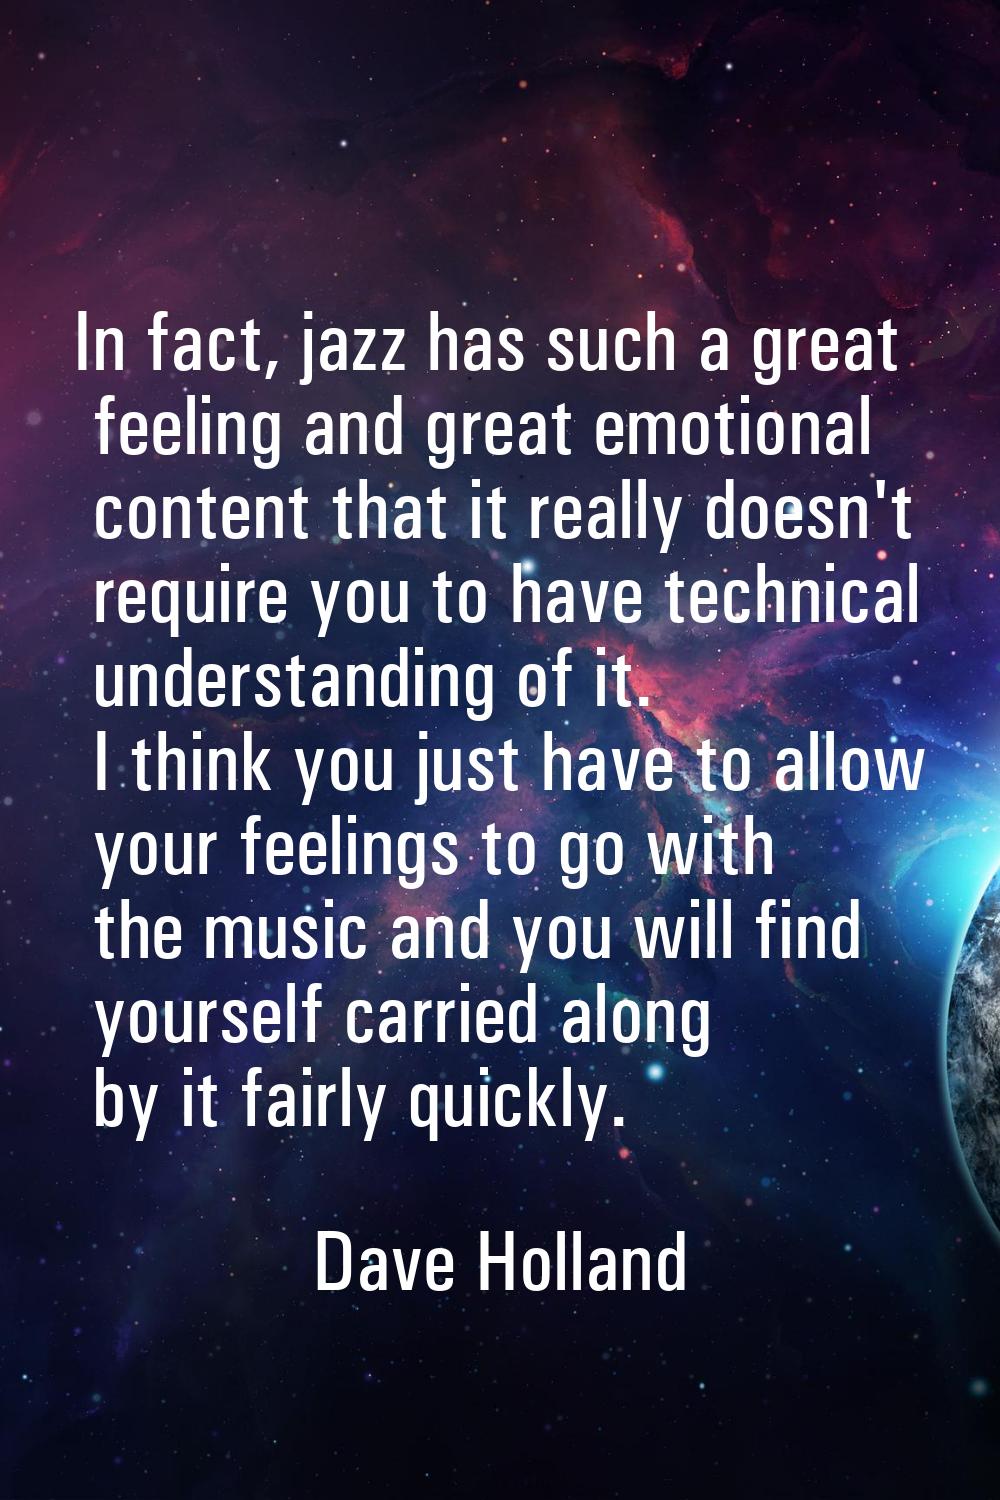 In fact, jazz has such a great feeling and great emotional content that it really doesn't require y